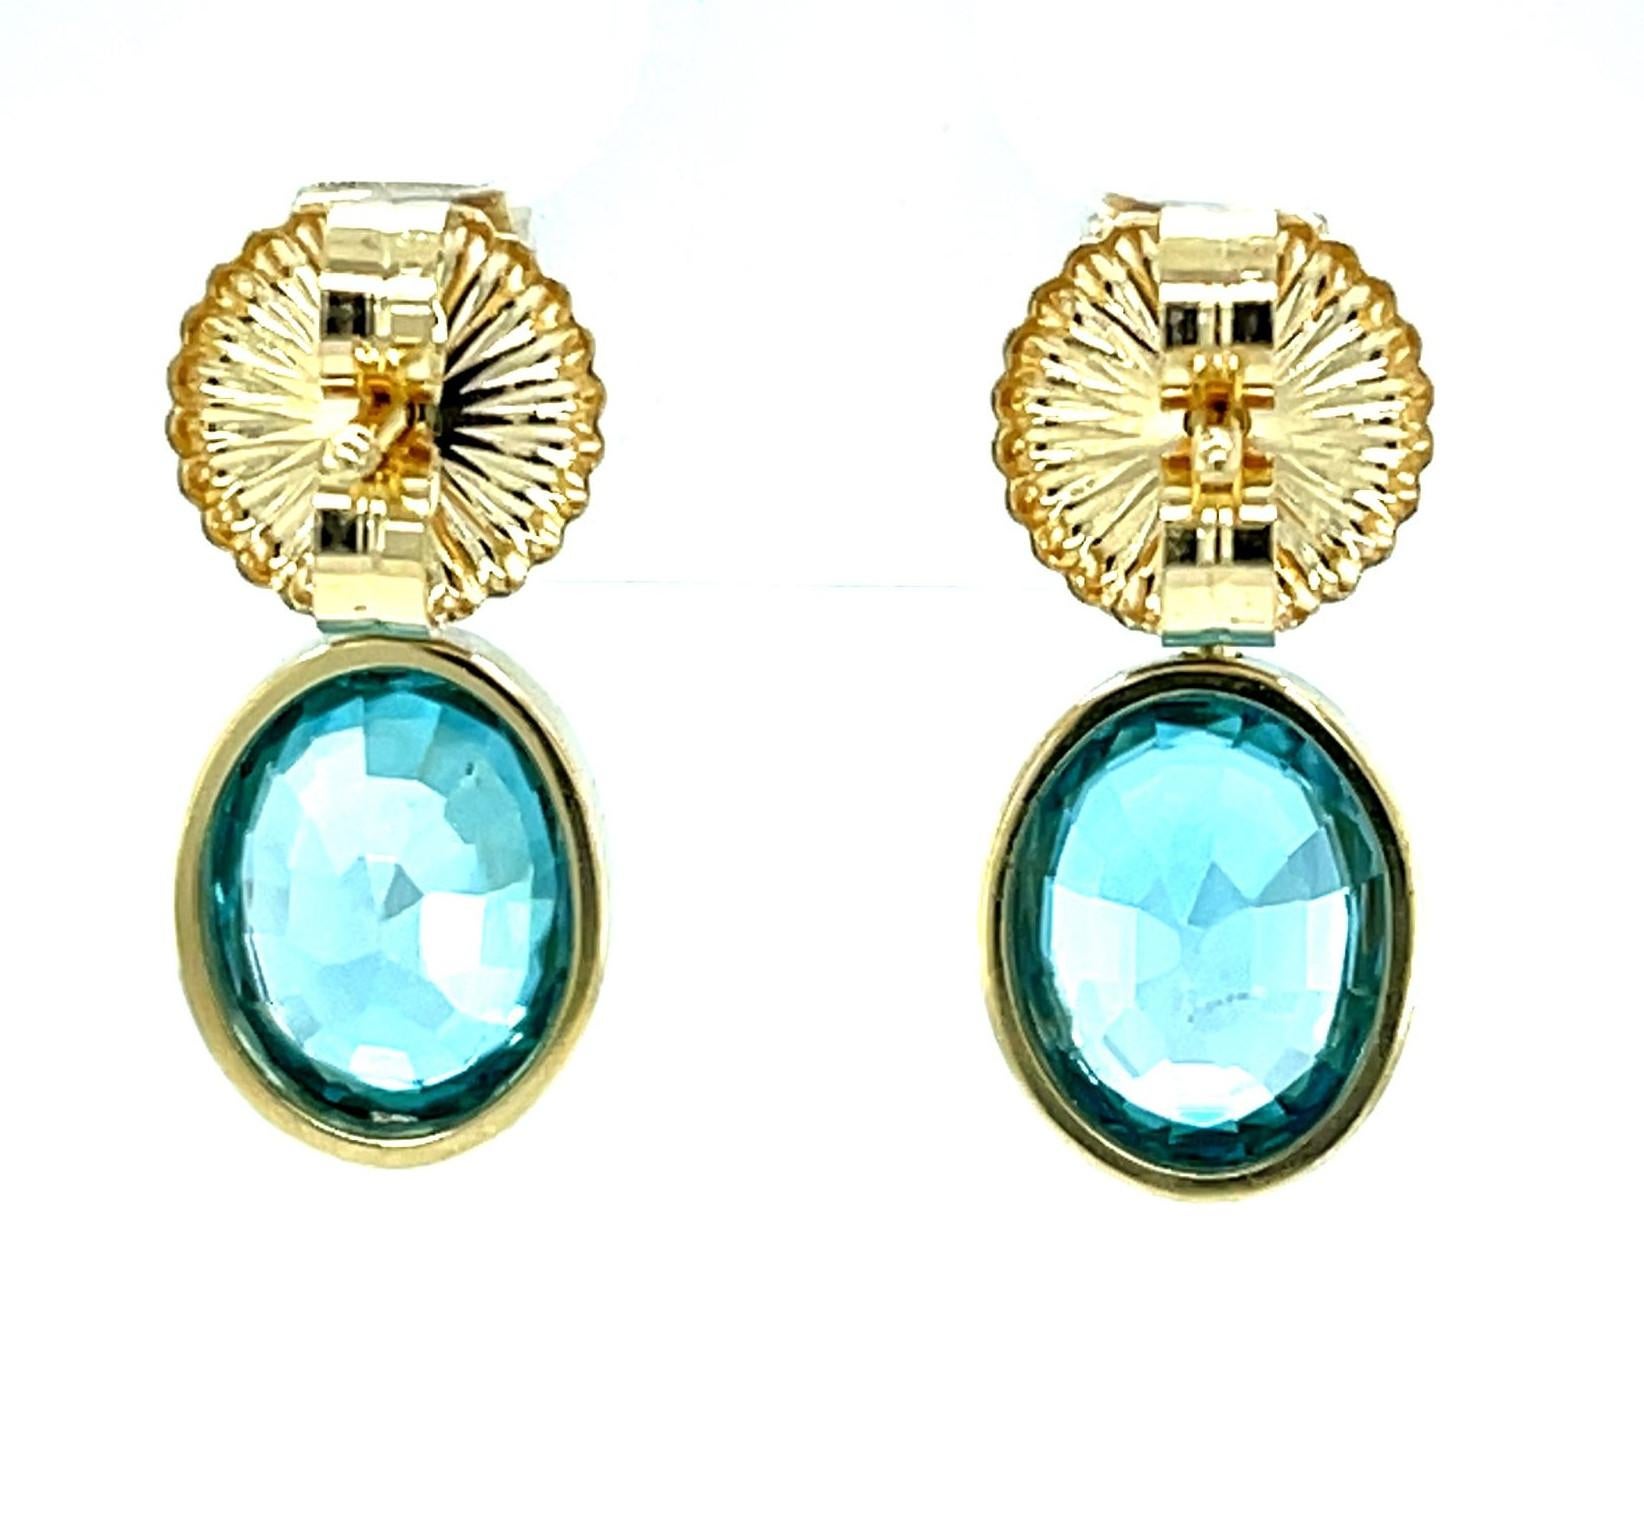 Artisan Blue Zircon and Diamond Drop Earrings in Yellow Gold, 9.38 Carats Total For Sale